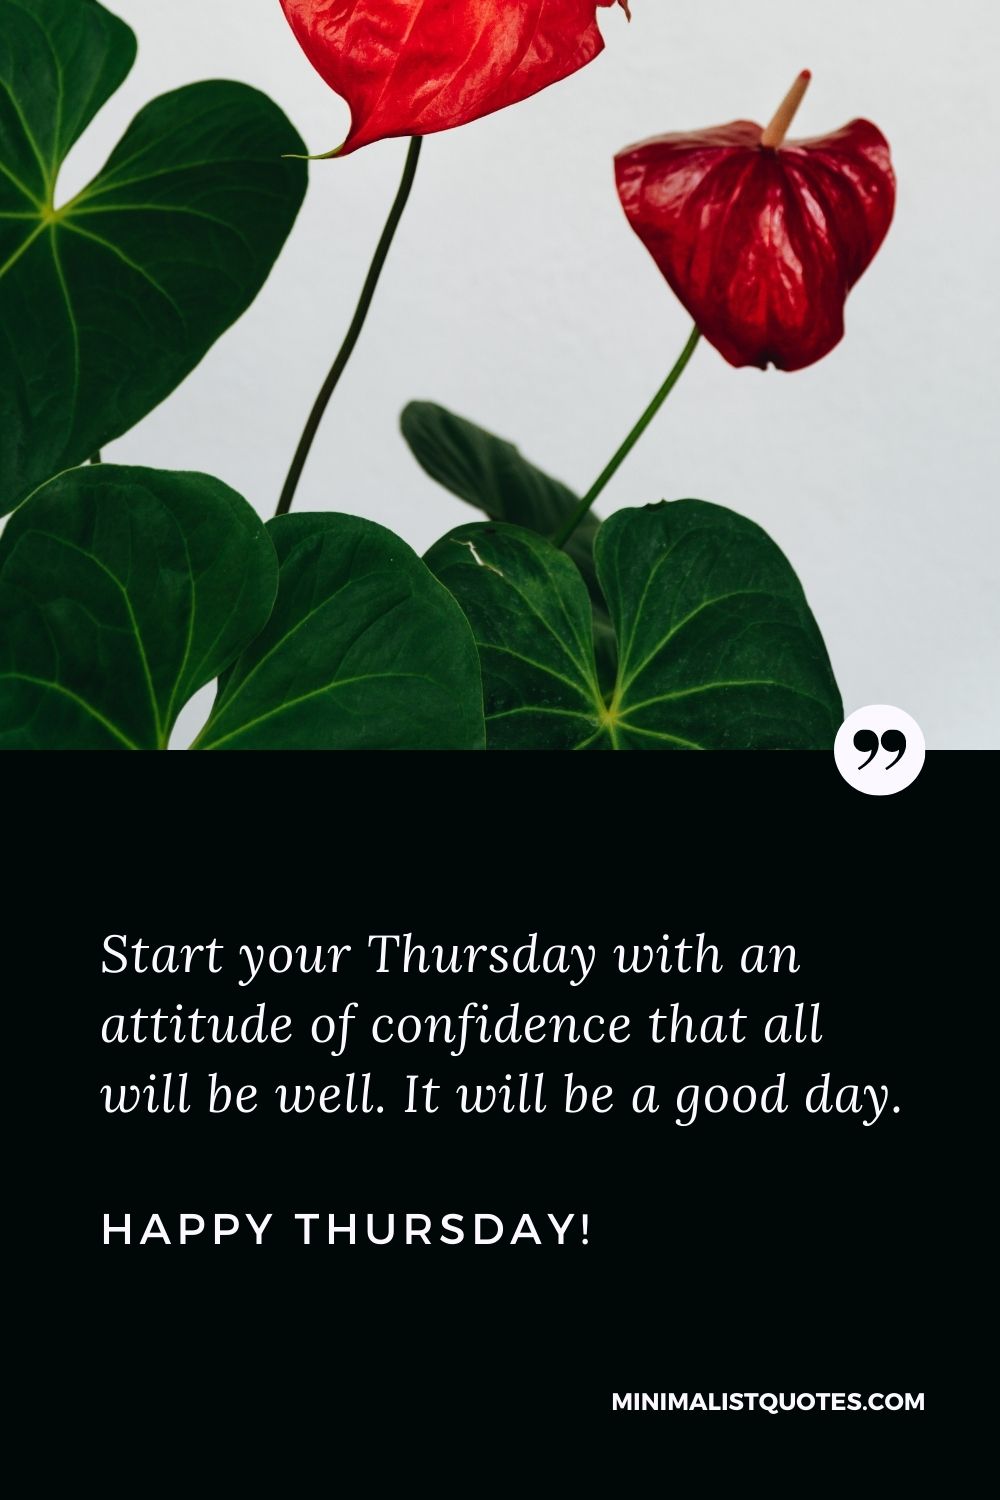 Good morning Thursday quotes: Start your Thursday with an attitude of confidence that all will be well. It will be a good day. Happy Thursday!